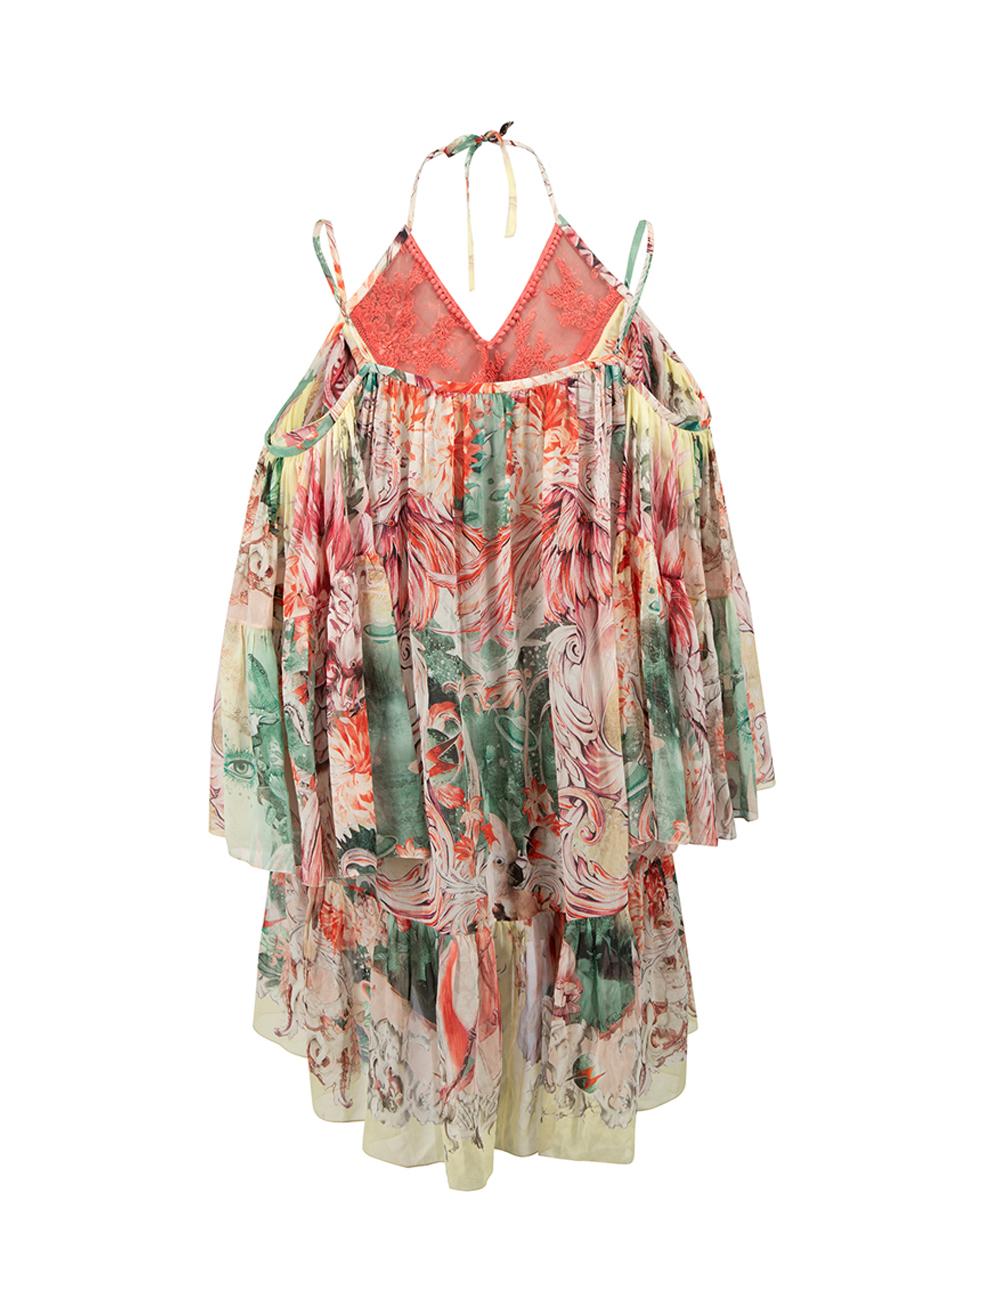 Roberto Cavalli Floral Ruffle Cold Shoulder Dress Size S In Good Condition For Sale In London, GB